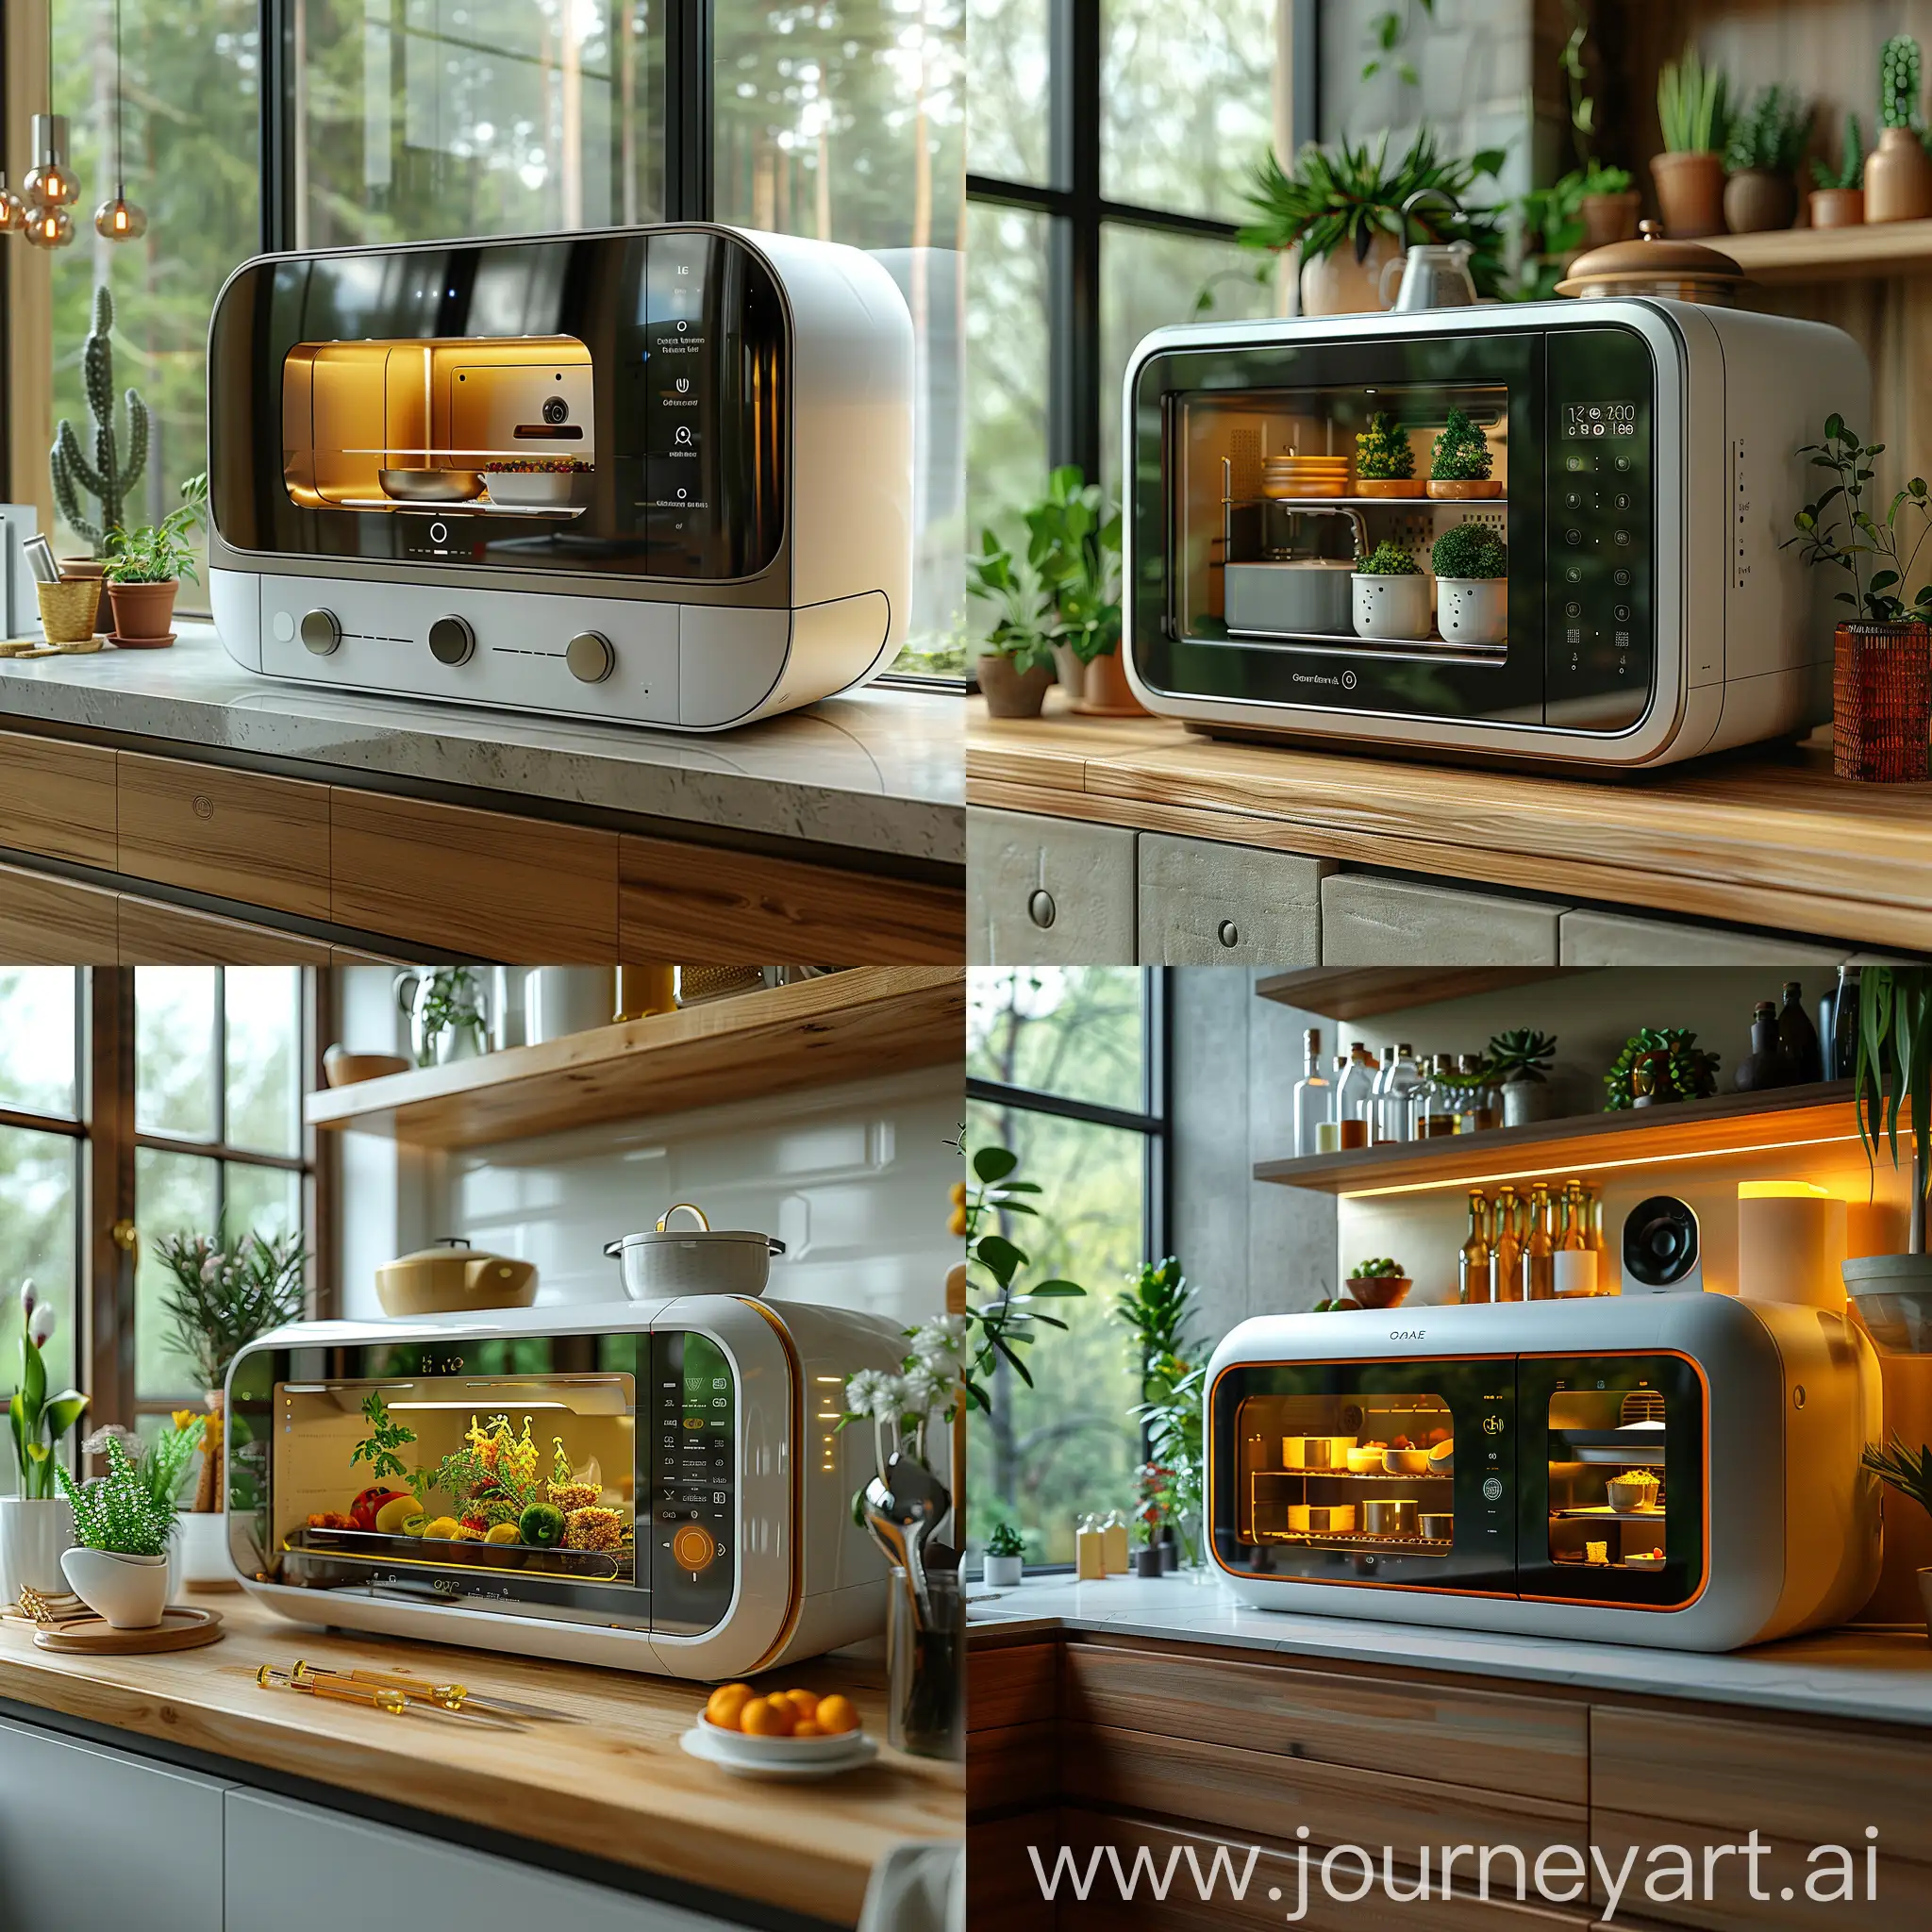 Futuristic Microwave, Energy-efficient cooking, Solar-powered option, Smart sensors, Recycled materials:, Low standby power consumption, Compostable packaging, Eco-friendly cleaning mode, Plant-based materials, Carbon offset program, Longevity and recyclability, Artificial Intelligence (AI) cooking assistant, Voice control, Advanced sensors, Augmented reality display, Internet connectivity, Self-cleaning feature, Multi-stage cooking, Food recognition technology, Built-in camera, Customizable presets, Nanoparticle heating elements, Nanocoating for easy cleaning, Nanosensors for precise cooking, Nanoparticles for food preservation, Nanofiltration system, Nanomaterials for lightweight and durable construction, Nanoscale energy storage, Nanoscale electromagnetic shielding, Nanoparticles for flavor enhancement, Nanotech-based smart control system, octane render --stylize 1000